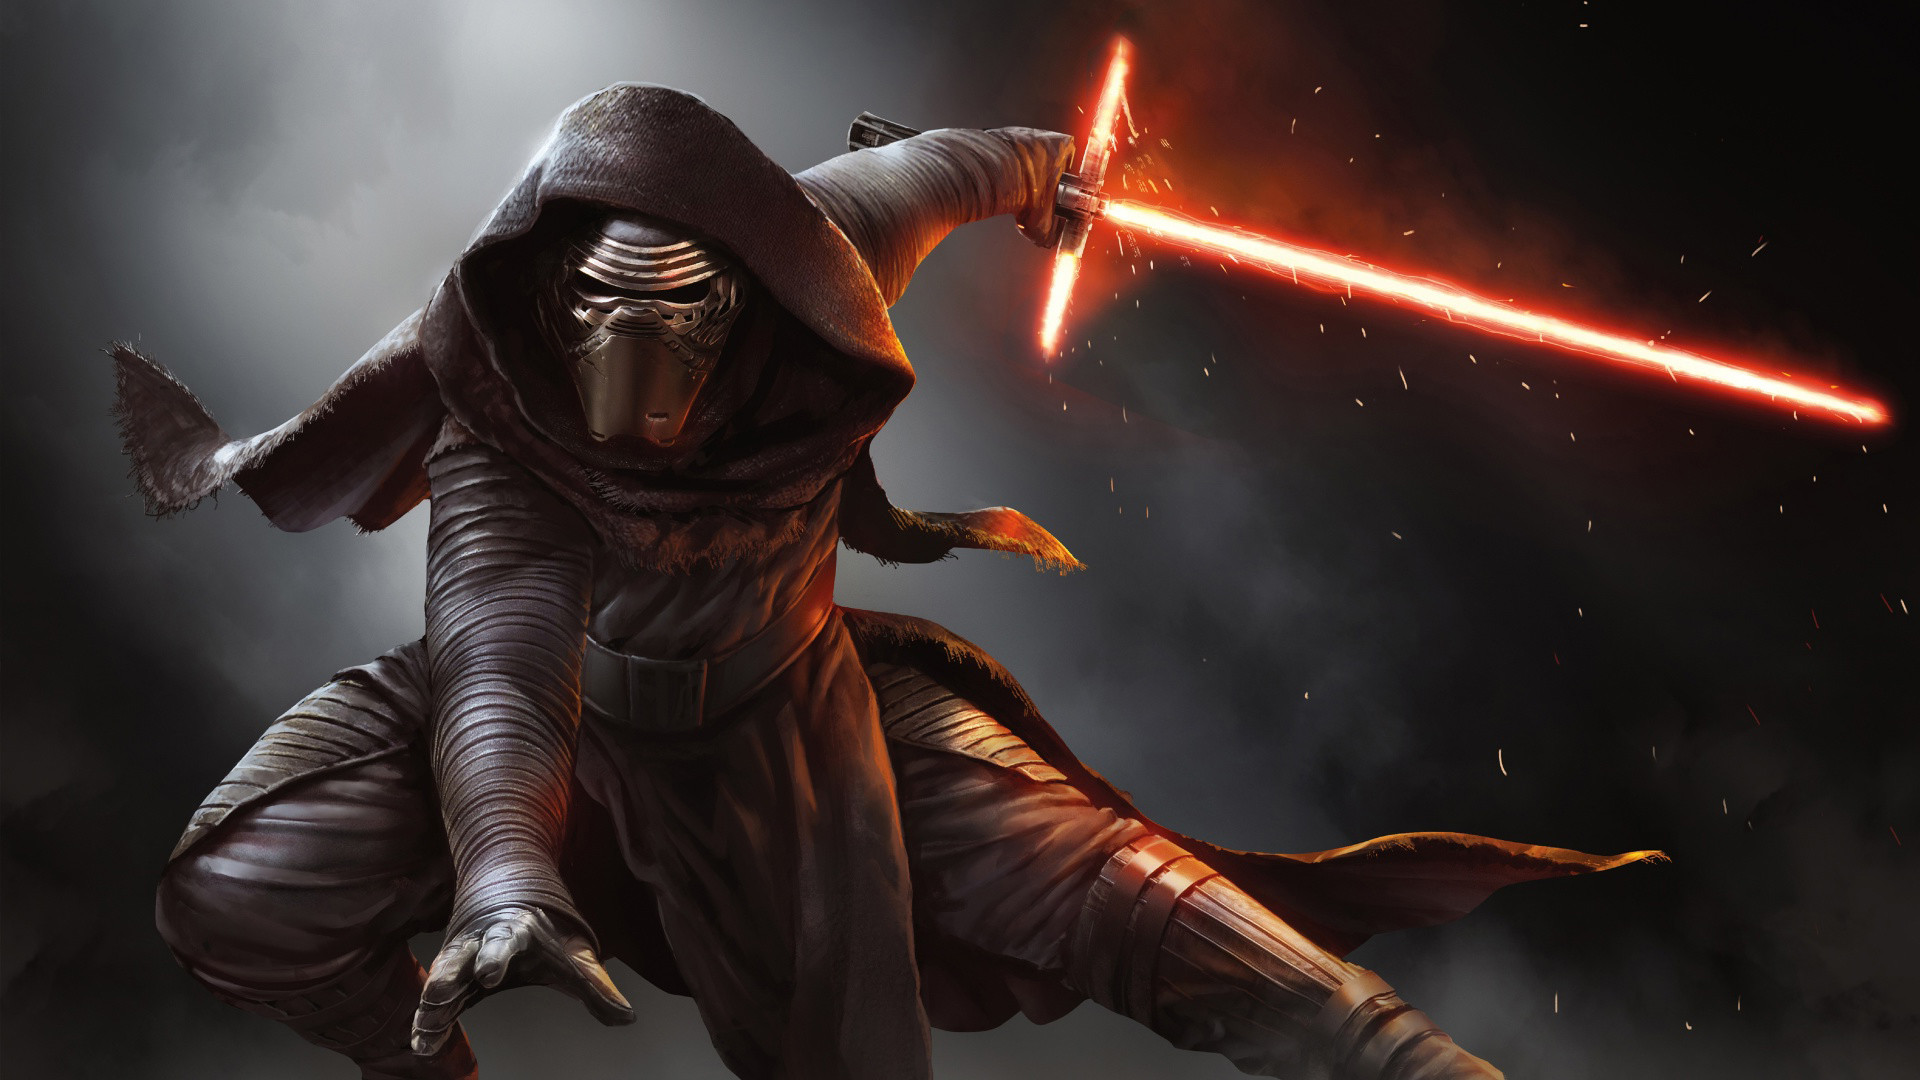 Kylo Ren Wallpapers Free Wallpapers & Background Images - Kylo Ren With Lightsaber - HD Wallpaper 